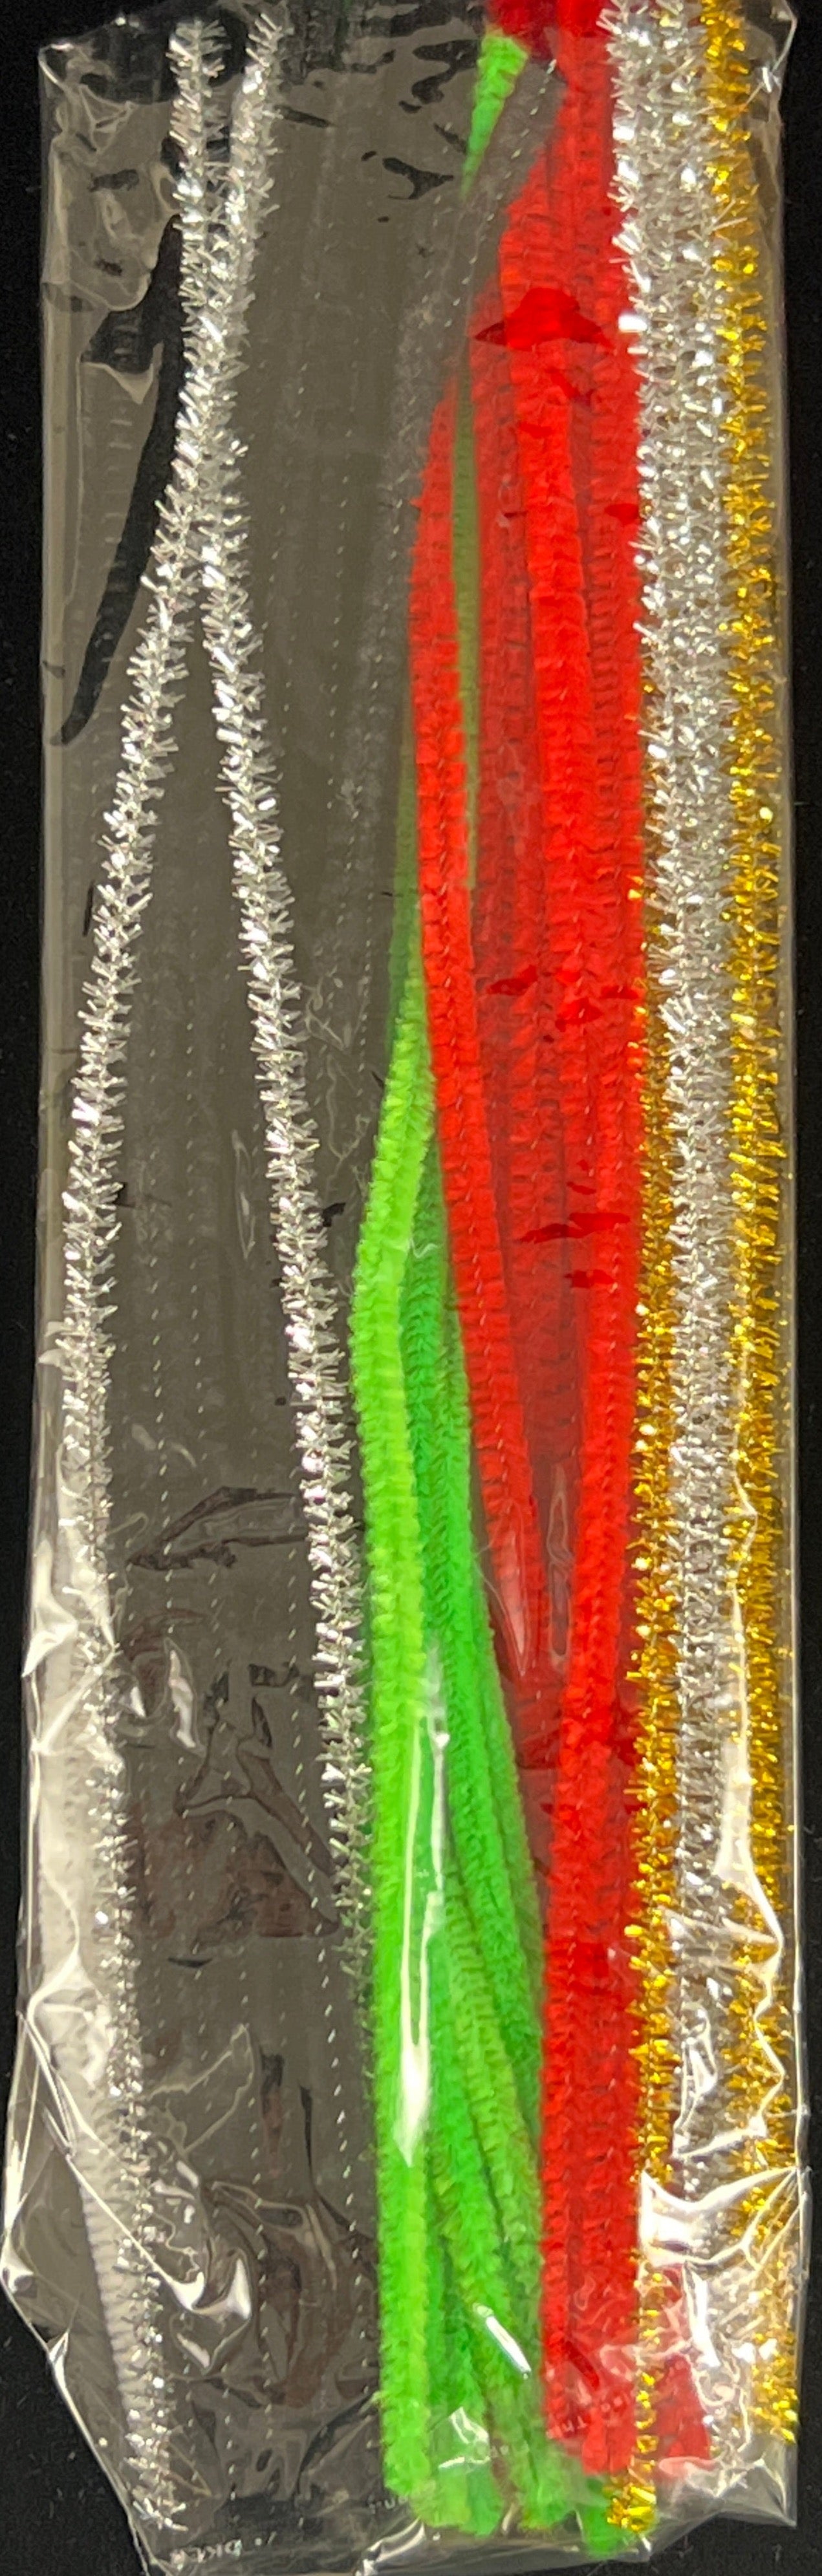 Pipe Cleaners - Christmas theme with Gold & Silver metallic - pack of 50